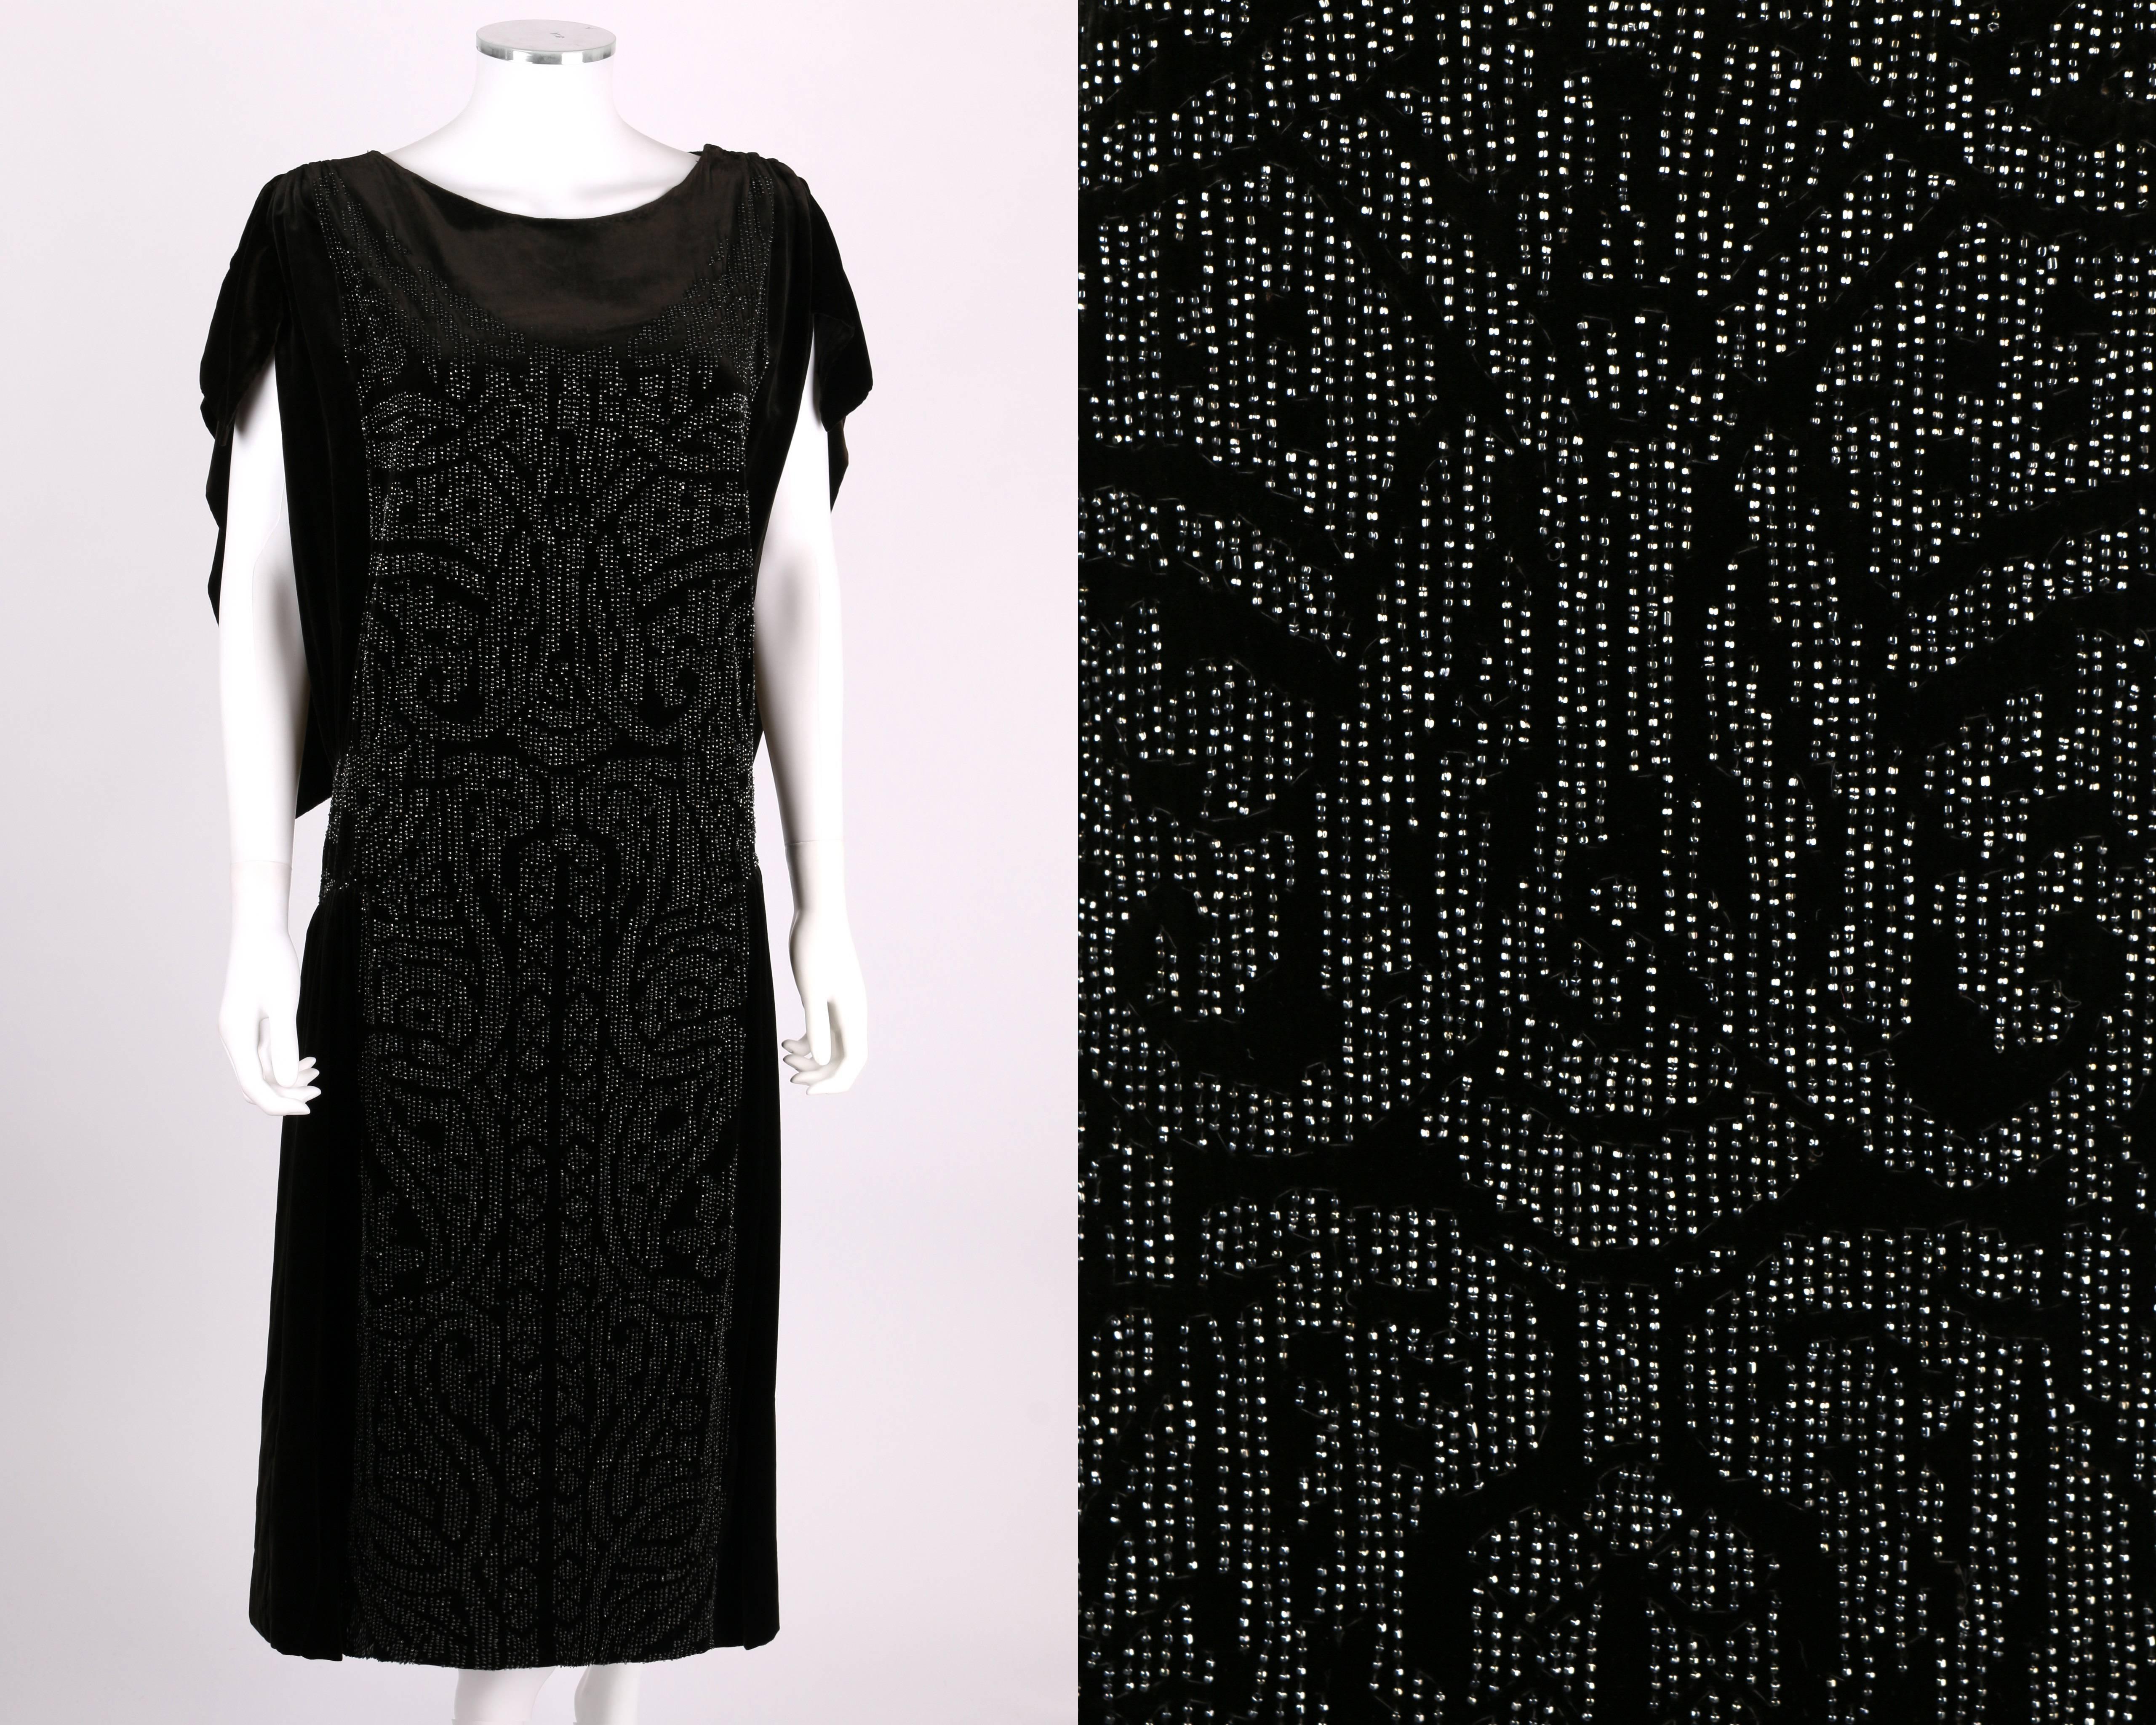 Vintage circa Fall 1922 Adair Paris - Franklin Simon & Co. Fifth Avenue black silk velvet evening dress.  Classically inspired beading.  Cap sleeves with cutouts at shoulders.  Cape-style back.  Snaps at shoulder.  Please note that this item was